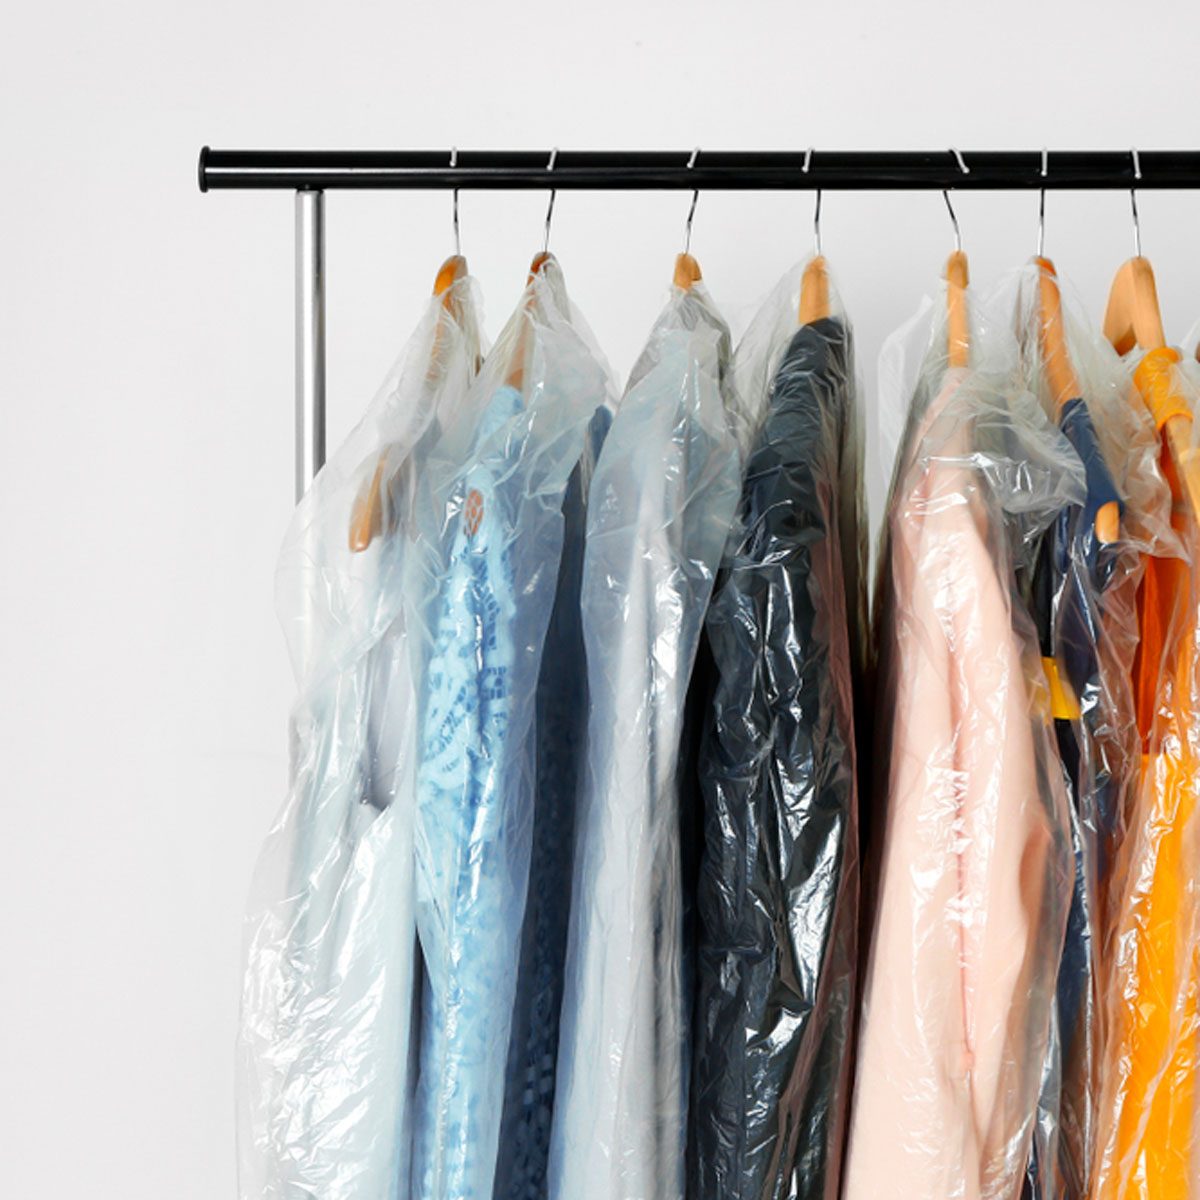 What Is the Best Way to Store Clothes?